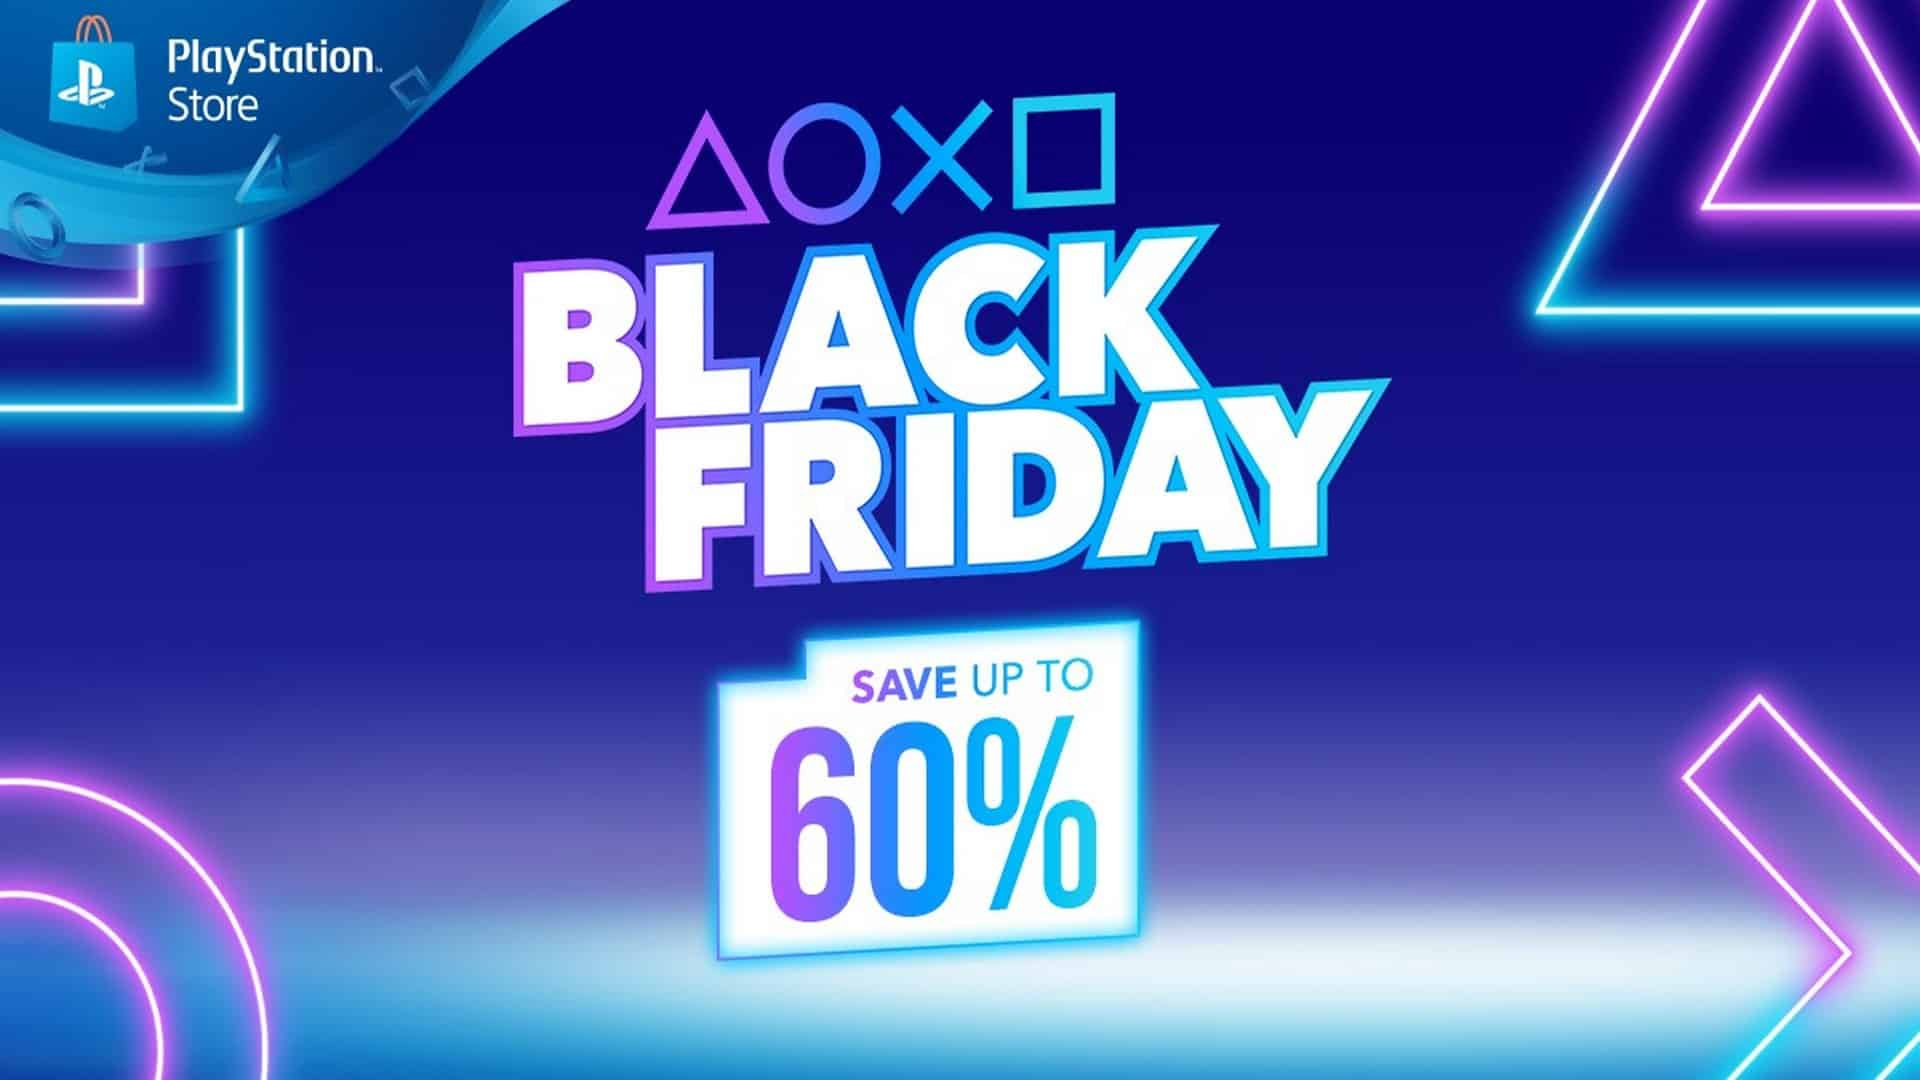 Hey Look, a Black Friday Advert Has Appeared on the PS4's Dashboard - Does Spidi Have Black Friday Deals